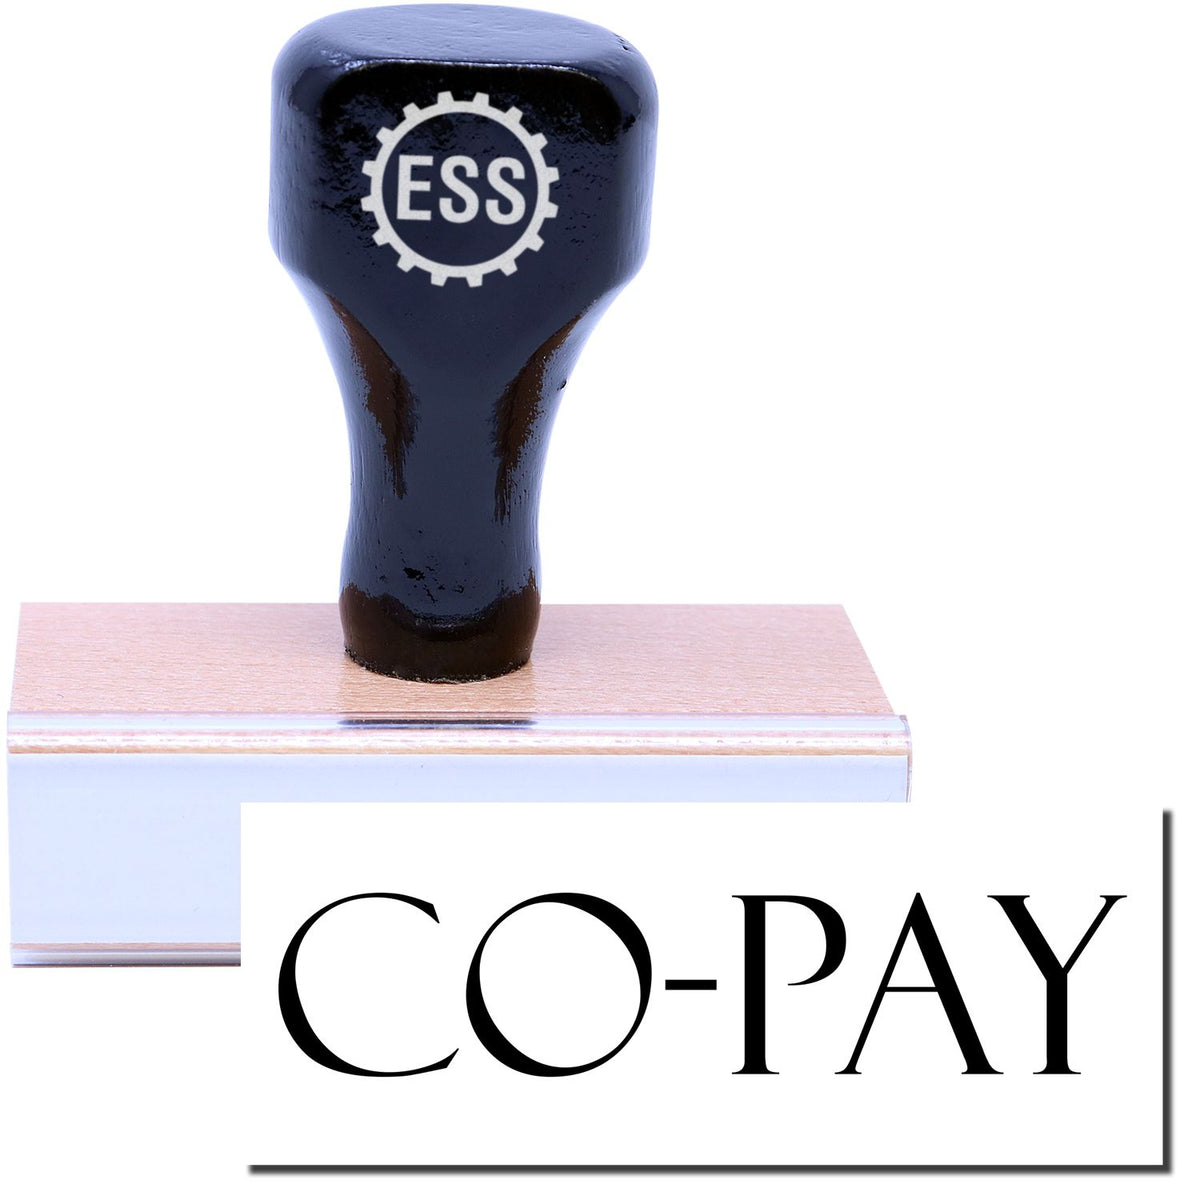 A stock office medical rubber stamp with a stamped image showing how the text &quot;CO-PAY&quot; is displayed after stamping.